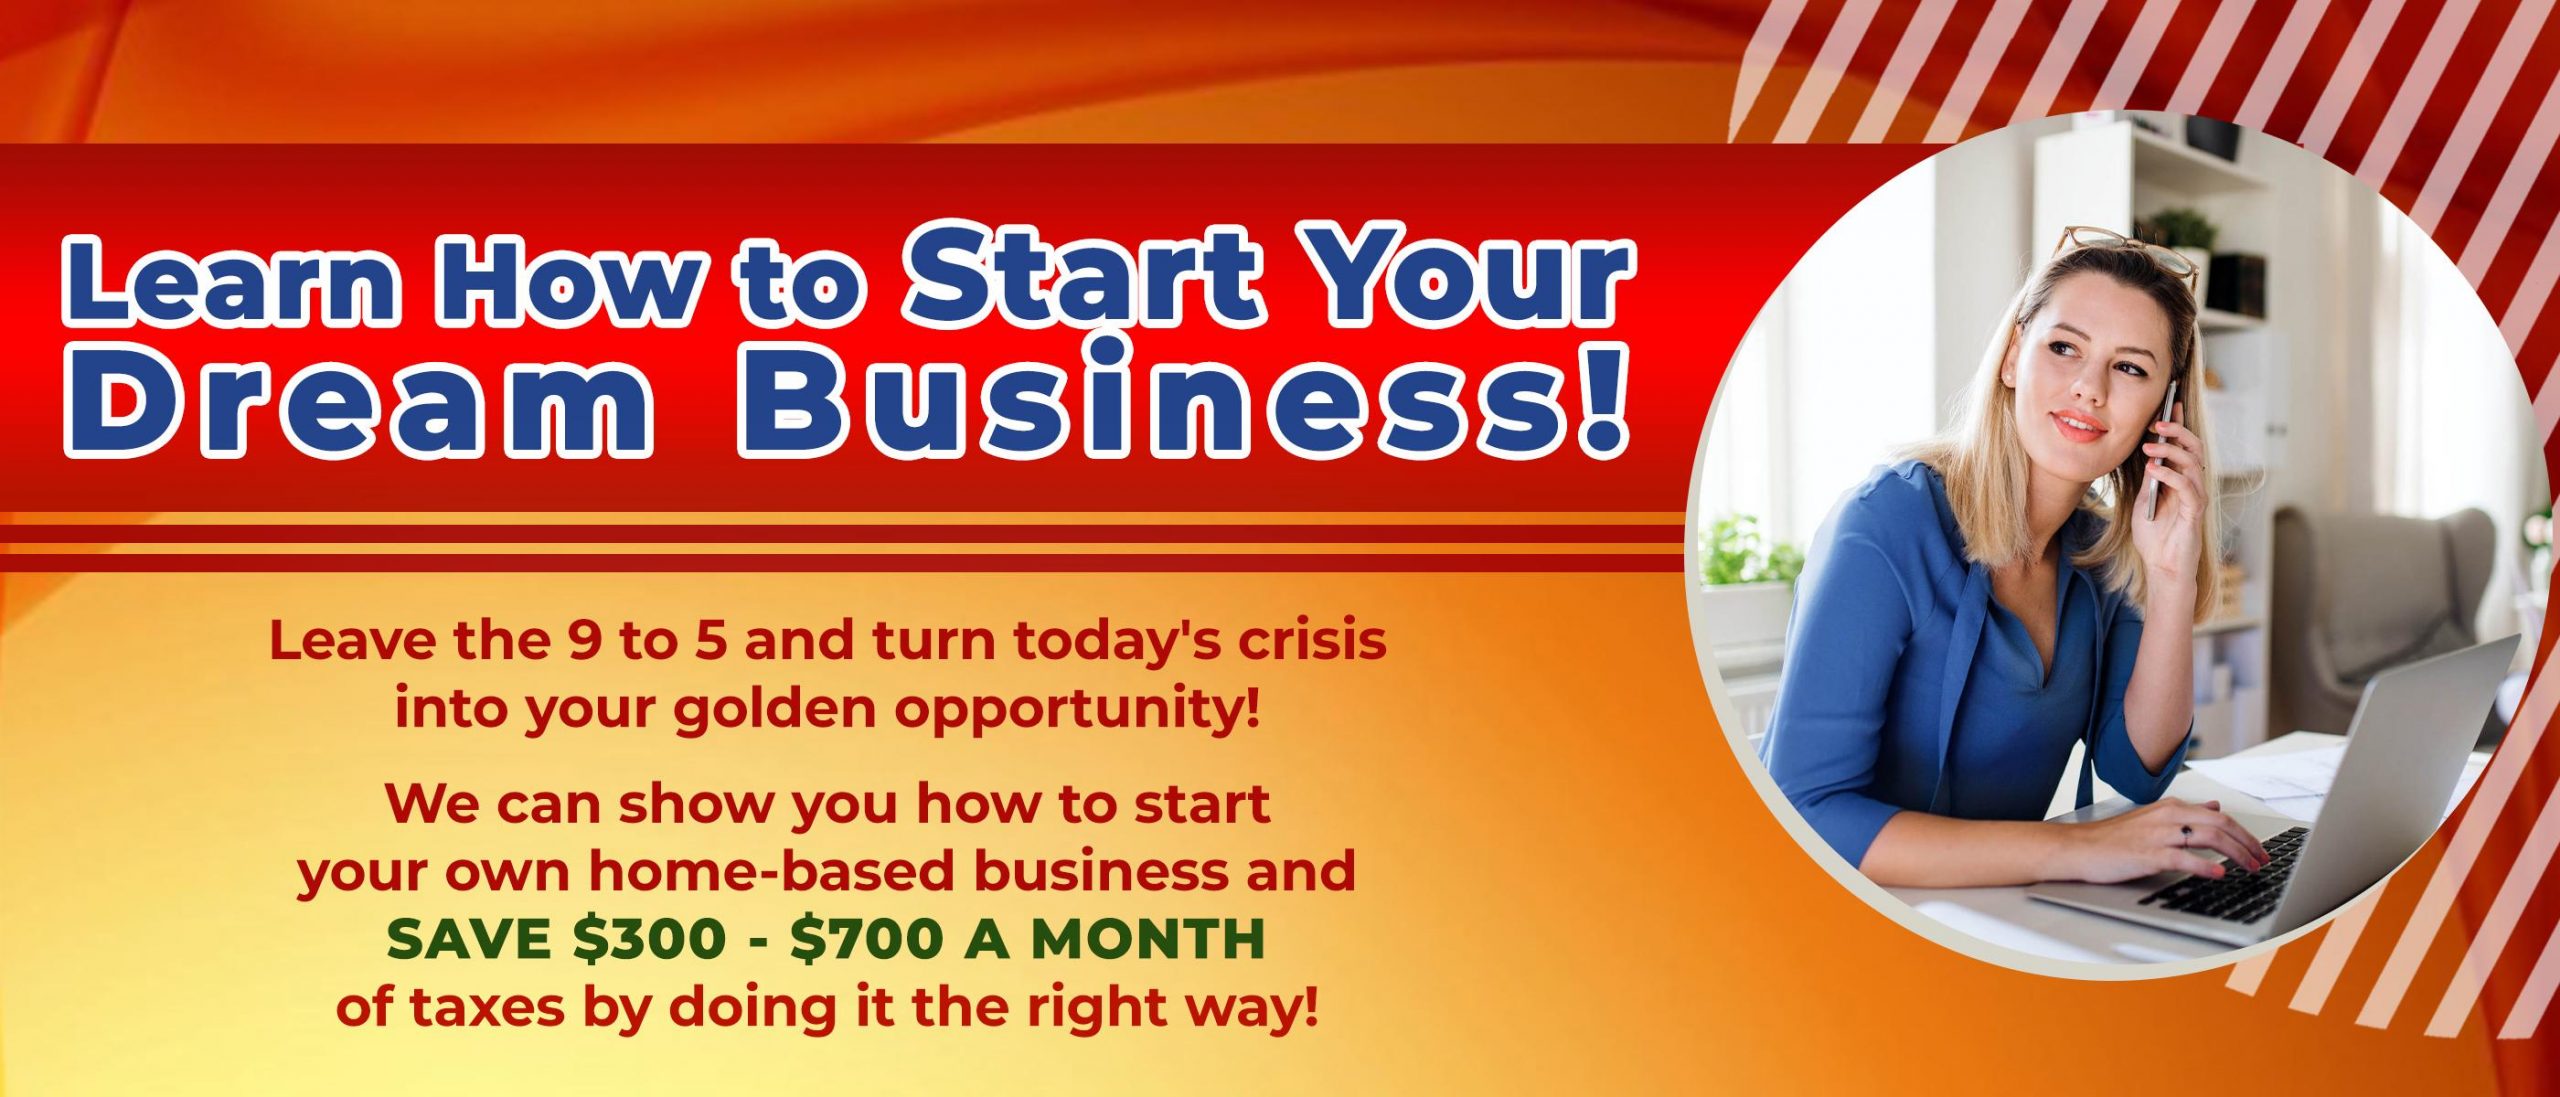 Learn How to Start Your Dream Business